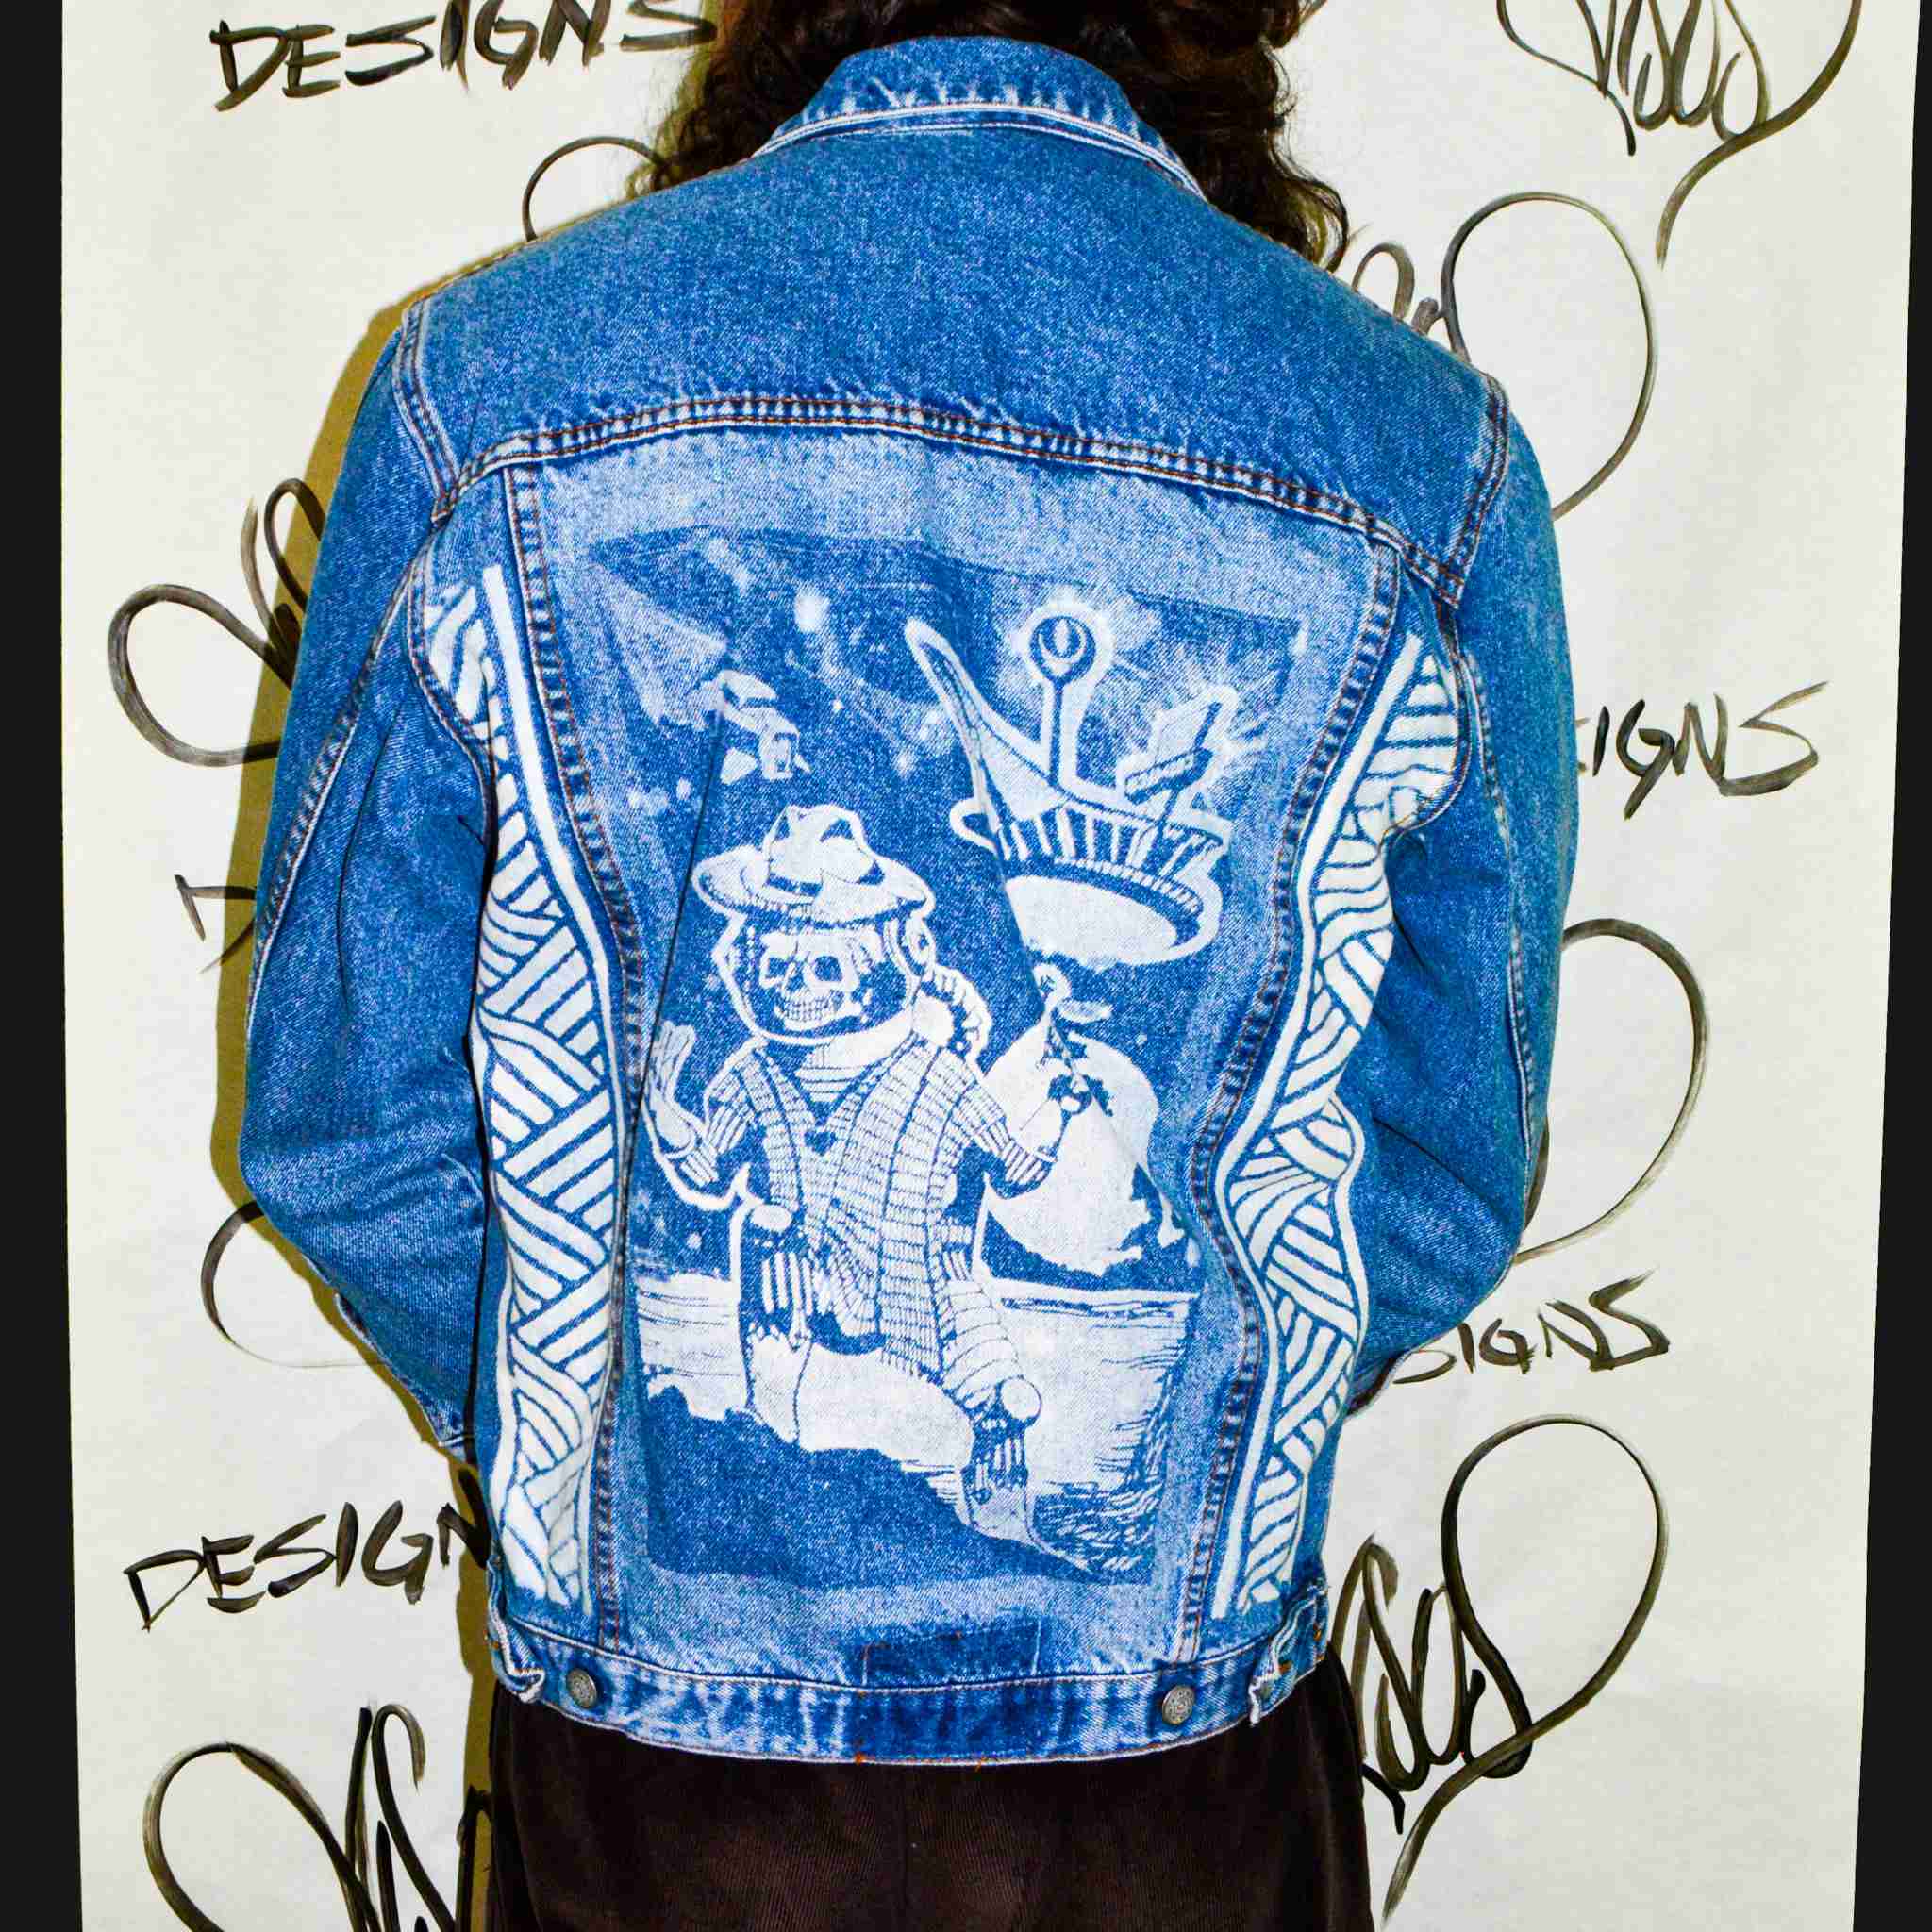 a person wearing a jean jacket with a drawing on it.